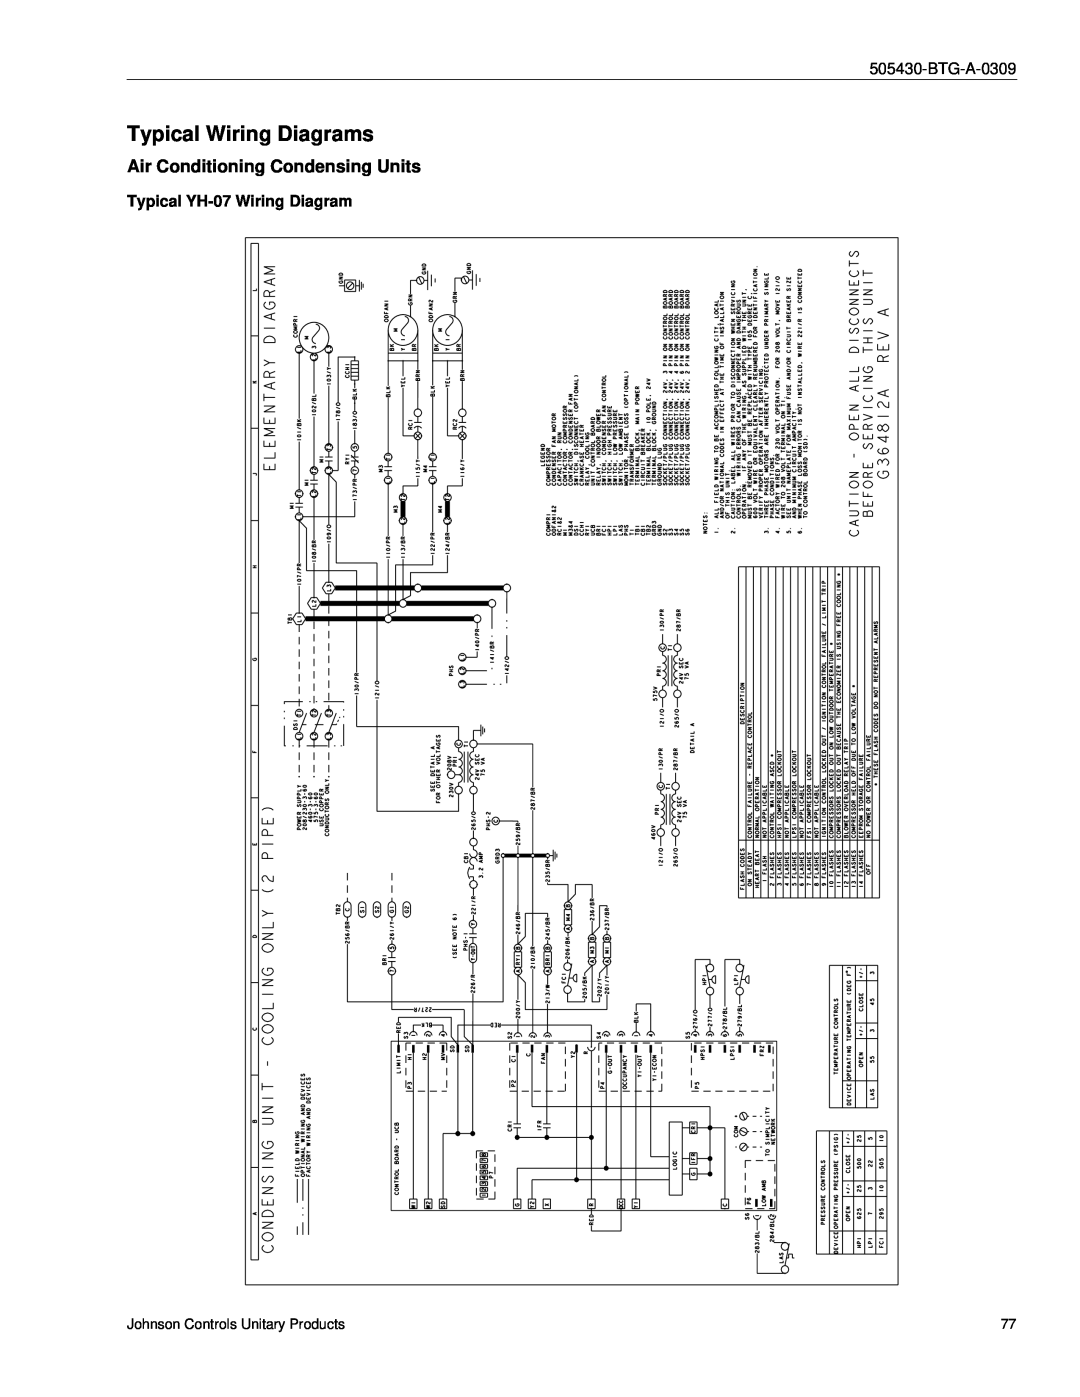 Johnson Controls R-410A manual Typical Wiring Diagrams, Air Conditioning Condensing Units, Typical YH-07Wiring Diagram 